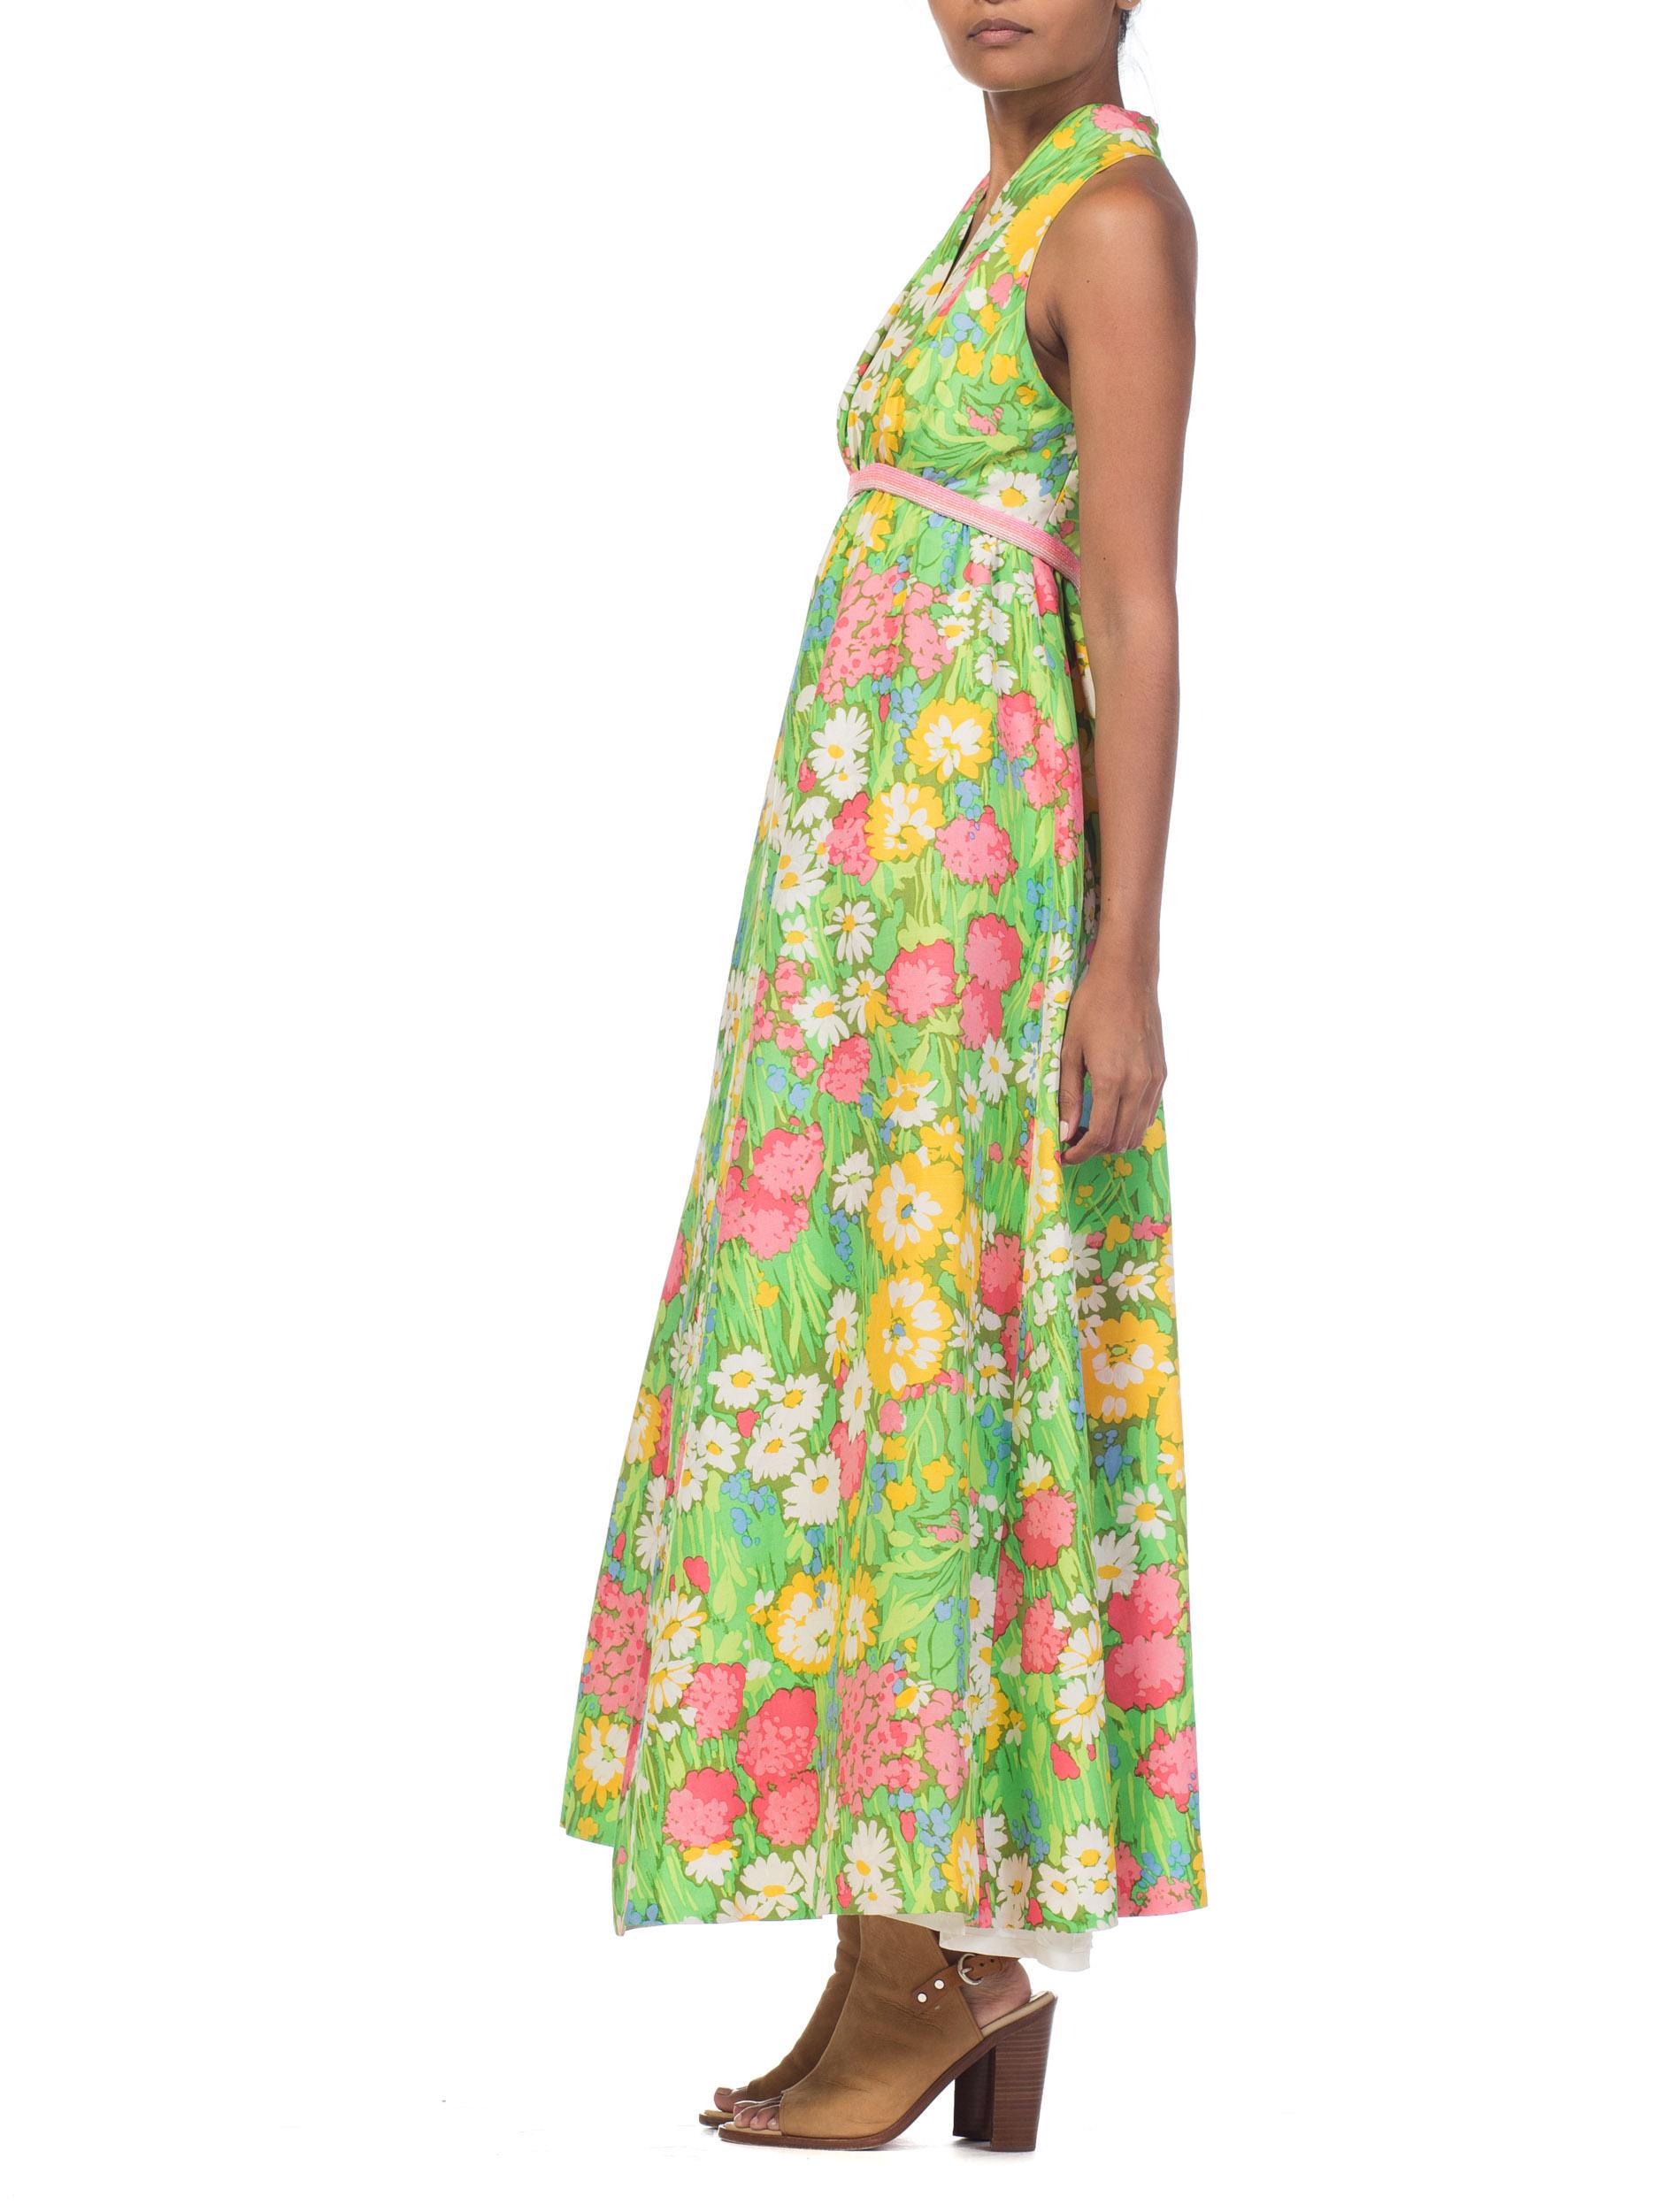 1960s 1970s Floral Printed Silk Halter Dress with Beading 11